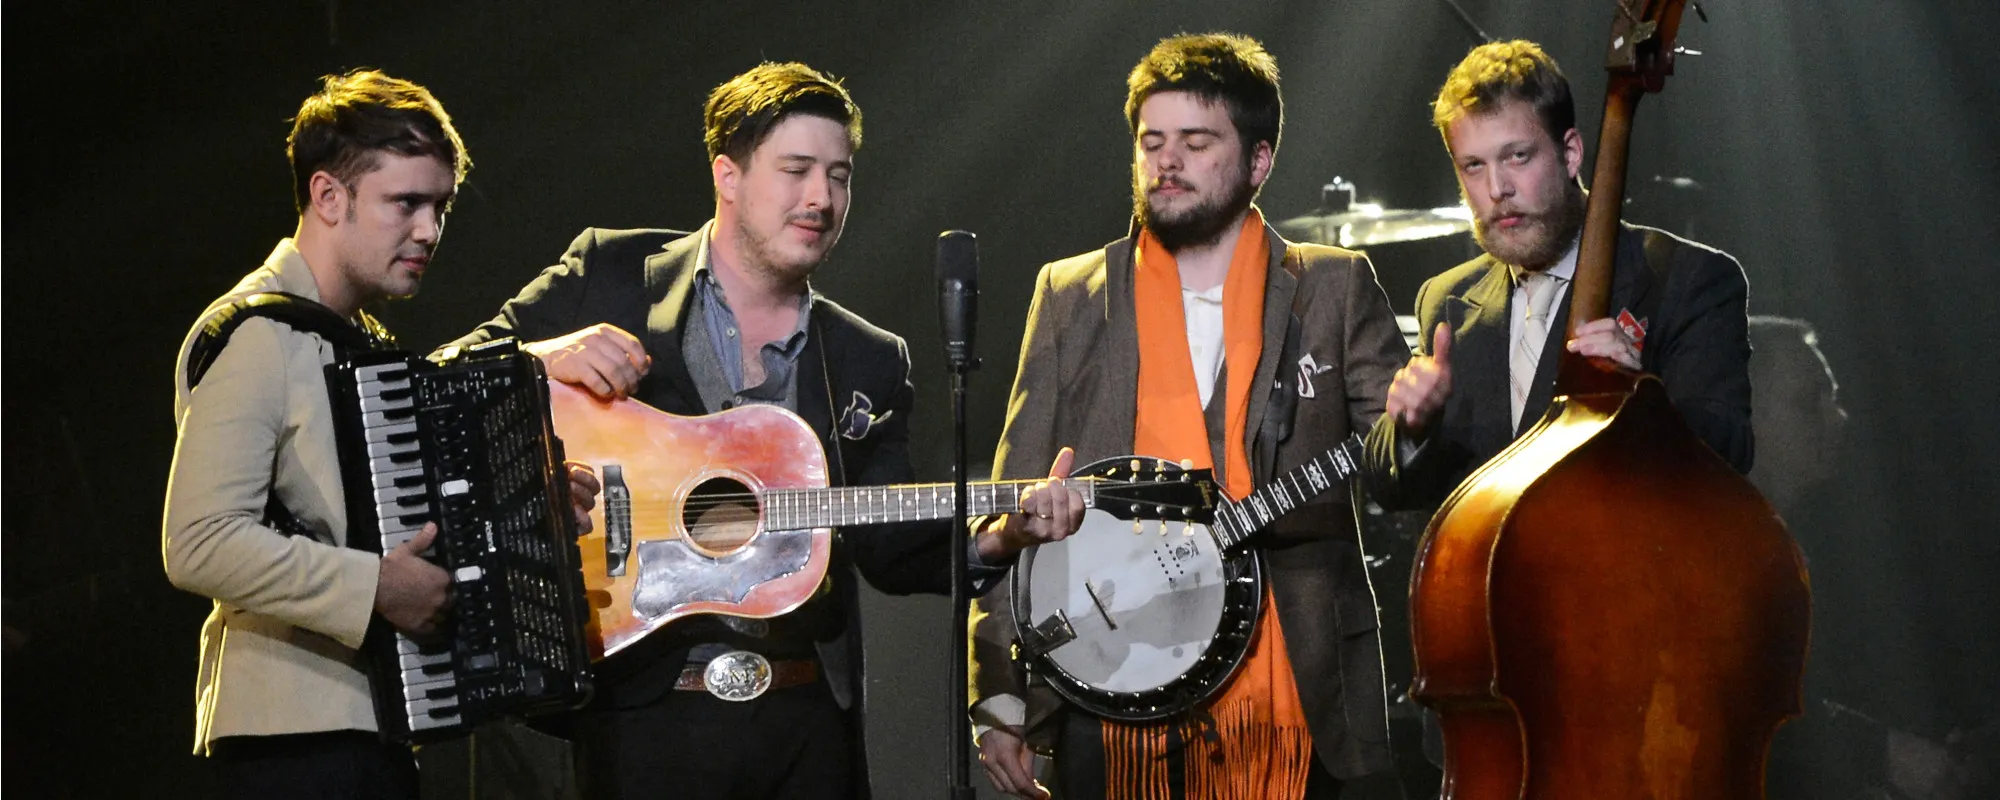 Mumford & Sons Talk Pharrell Collab for New Single “Good People,” Return to Music After 5-Year Absence